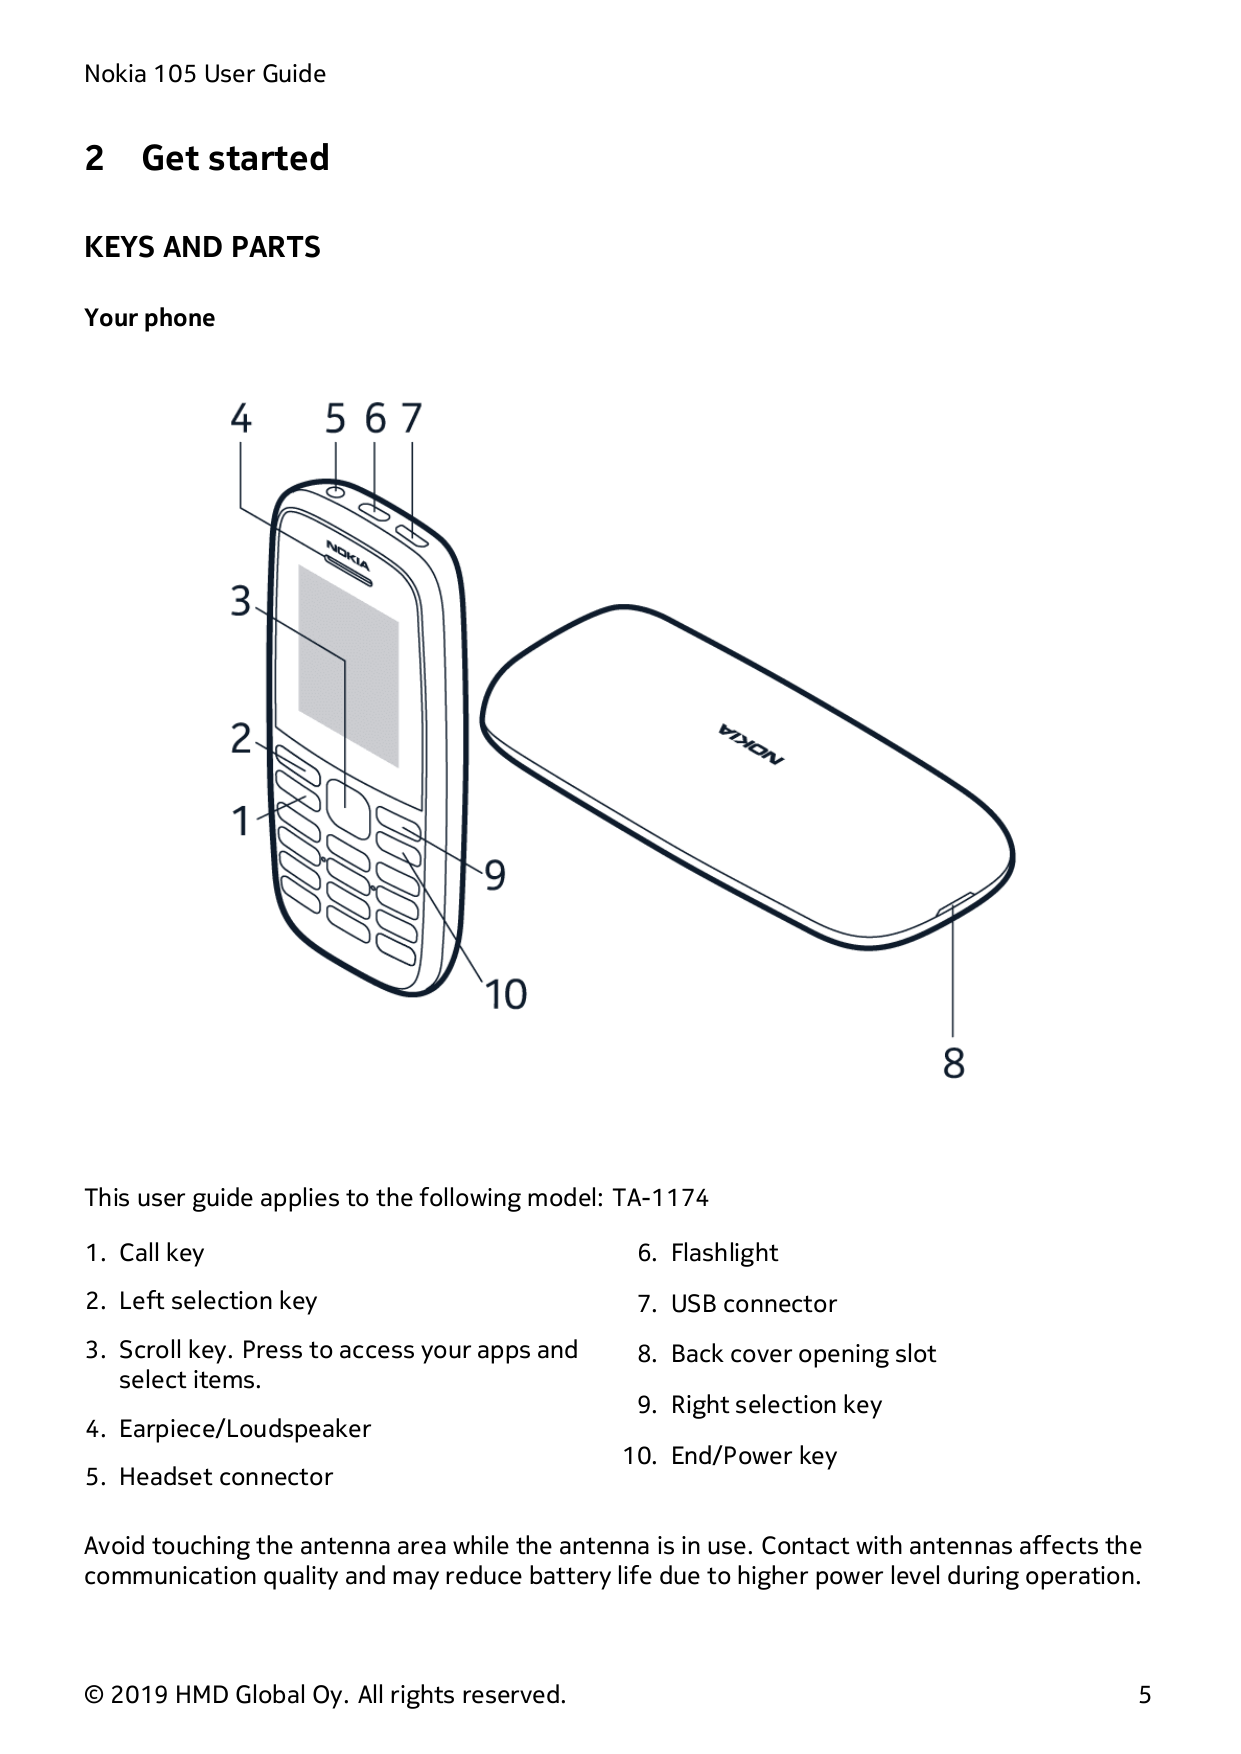 Nokia 105 User Guide2Get startedKEYS AND PARTSYour phoneThis user guide applies to the following model: TA-11741. Call key6. Fla